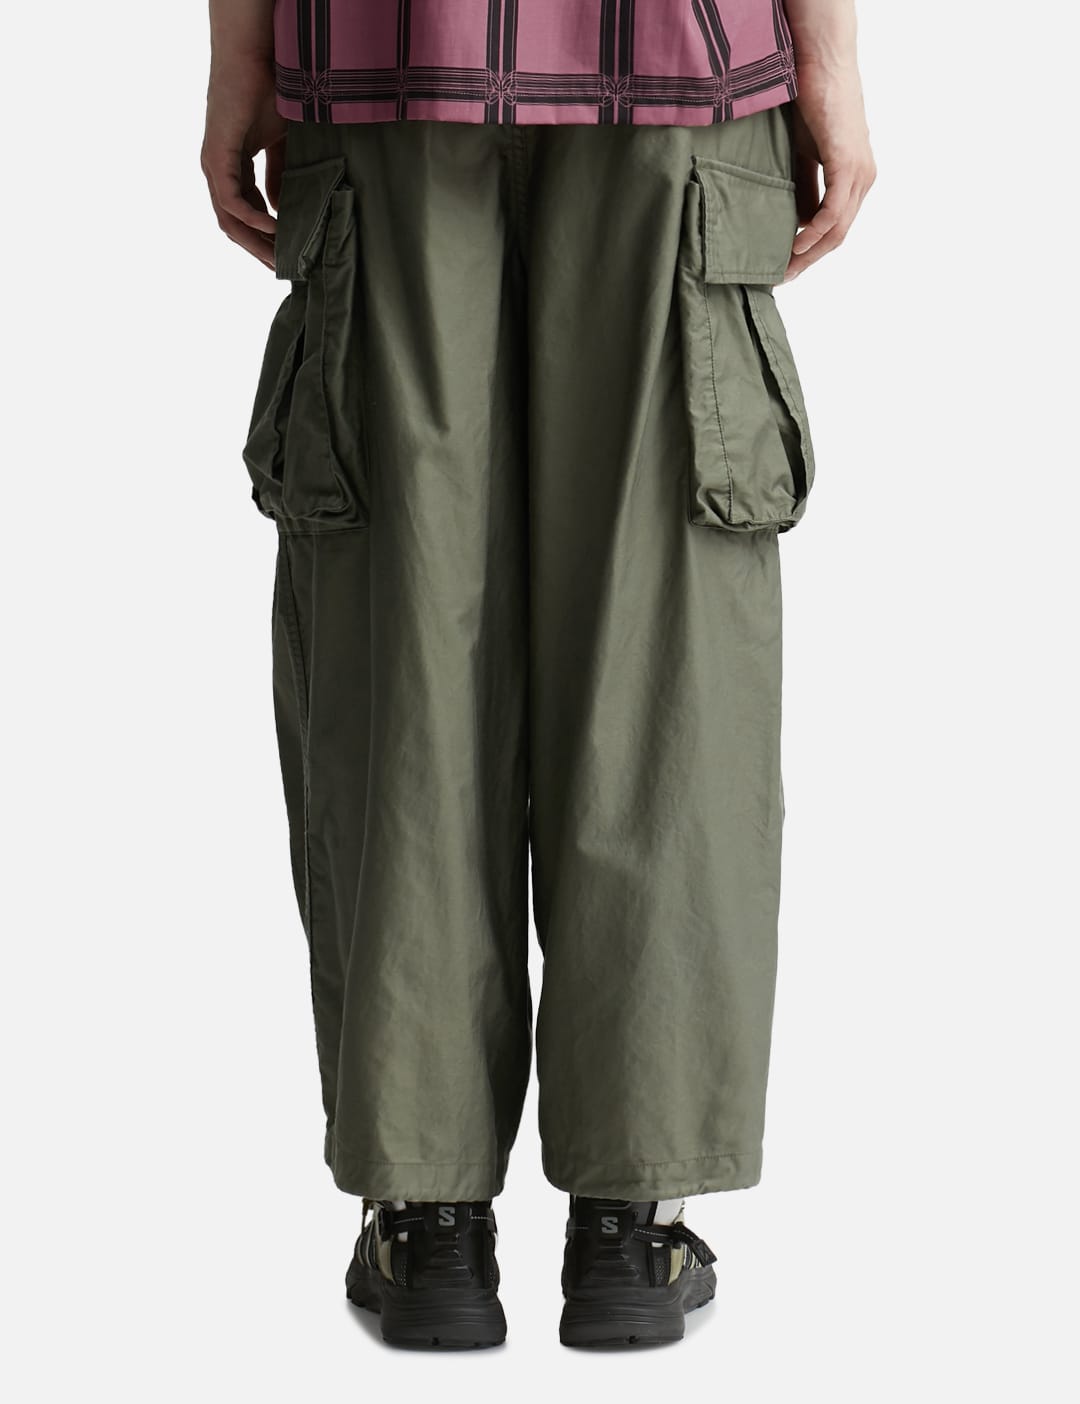 Needles - H.D BDU Pants | HBX - Globally Curated Fashion and